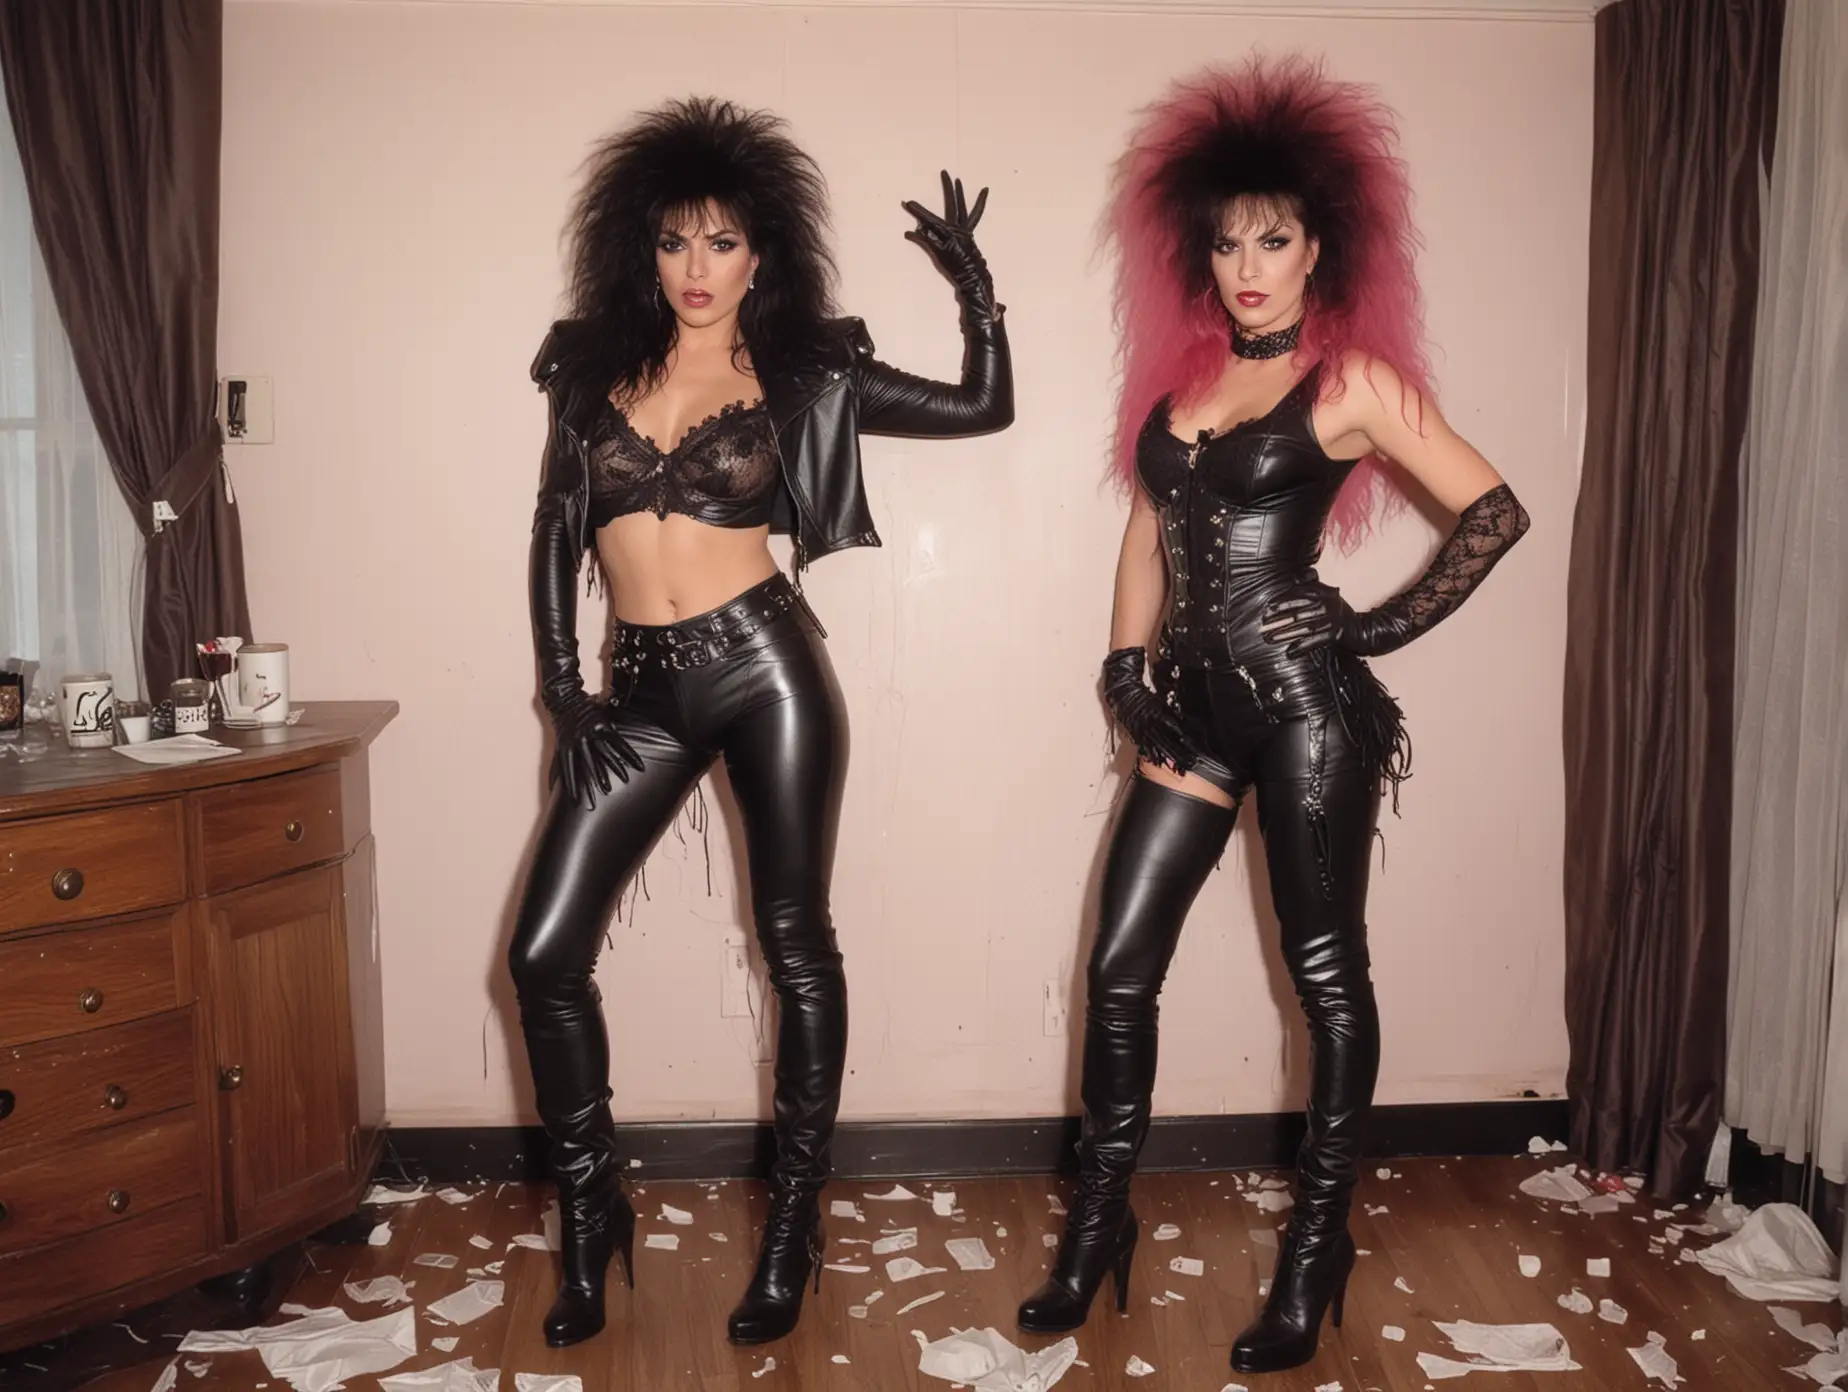 FULL LENGTH VIEW OF 1980S MAXINE PETRUCCI OF MADAM X BAND WITH ENORMOUS HUGE SPIKY HAIR WEARING A BLACK LACE TOP, BLACK LEATHER PANTS, PINK KNICKERS,PANTIES FISHNET STOCKINGS, BLACK LEATHER THIGH LENGTH LEATHER BOOTS , BLACK LEATHER GLOVES STANDING IN A TRASHED HOTEL ROOM